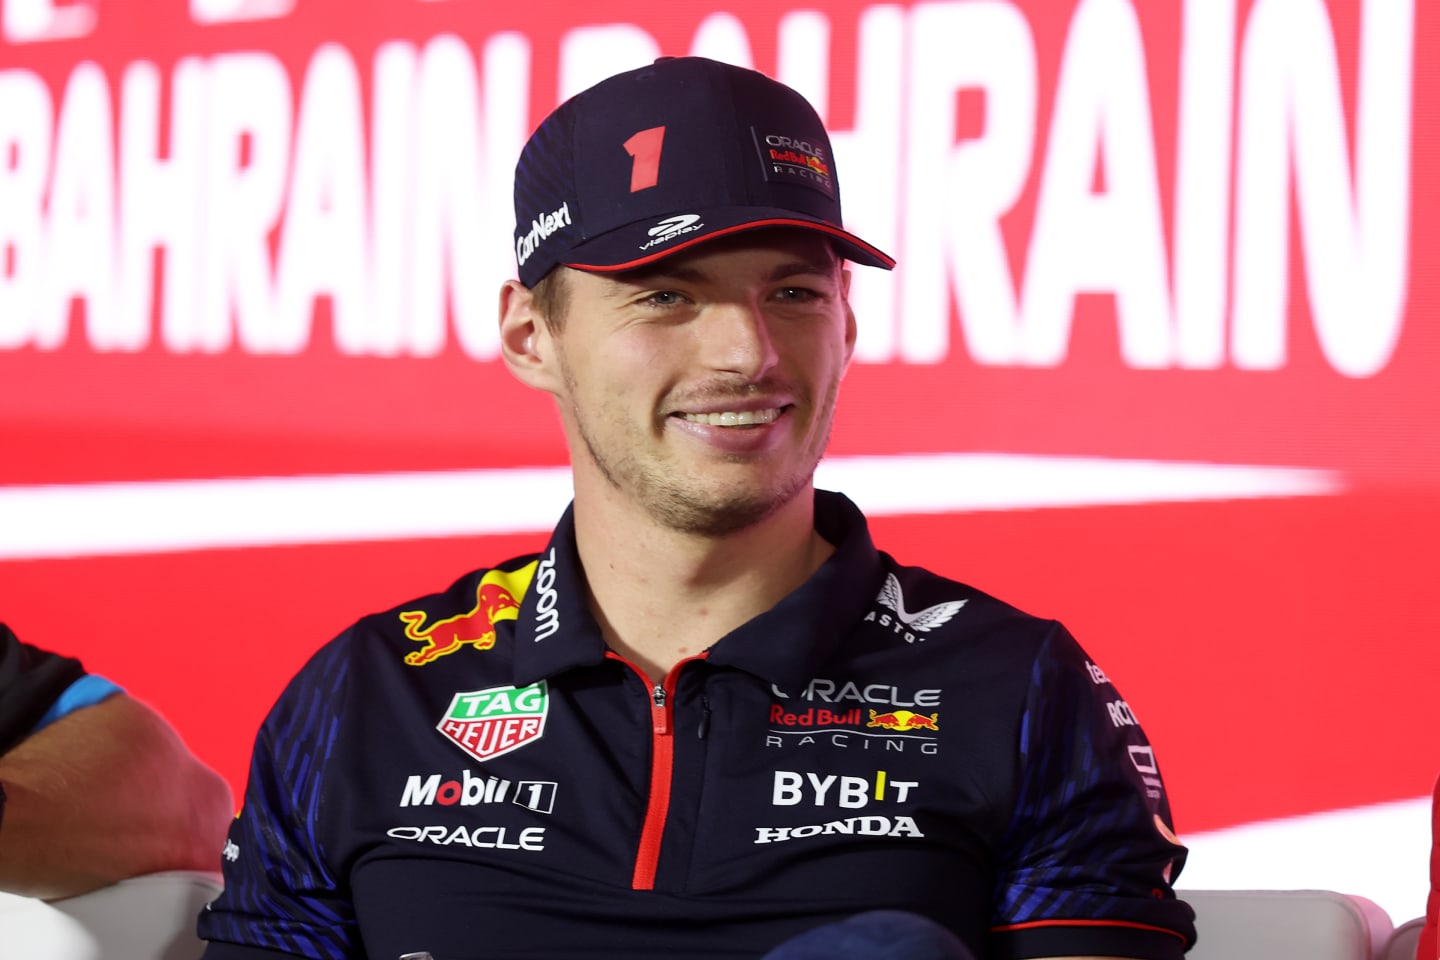 BAHRAIN, BAHRAIN - MARCH 02: Max Verstappen of the Netherlands and Oracle Red Bull Racing attends the Drivers Press Conference during previews ahead of the F1 Grand Prix of Bahrain at Bahrain International Circuit on March 02, 2023 in Bahrain, Bahrain. (Photo by Lars Baron/Getty Images)